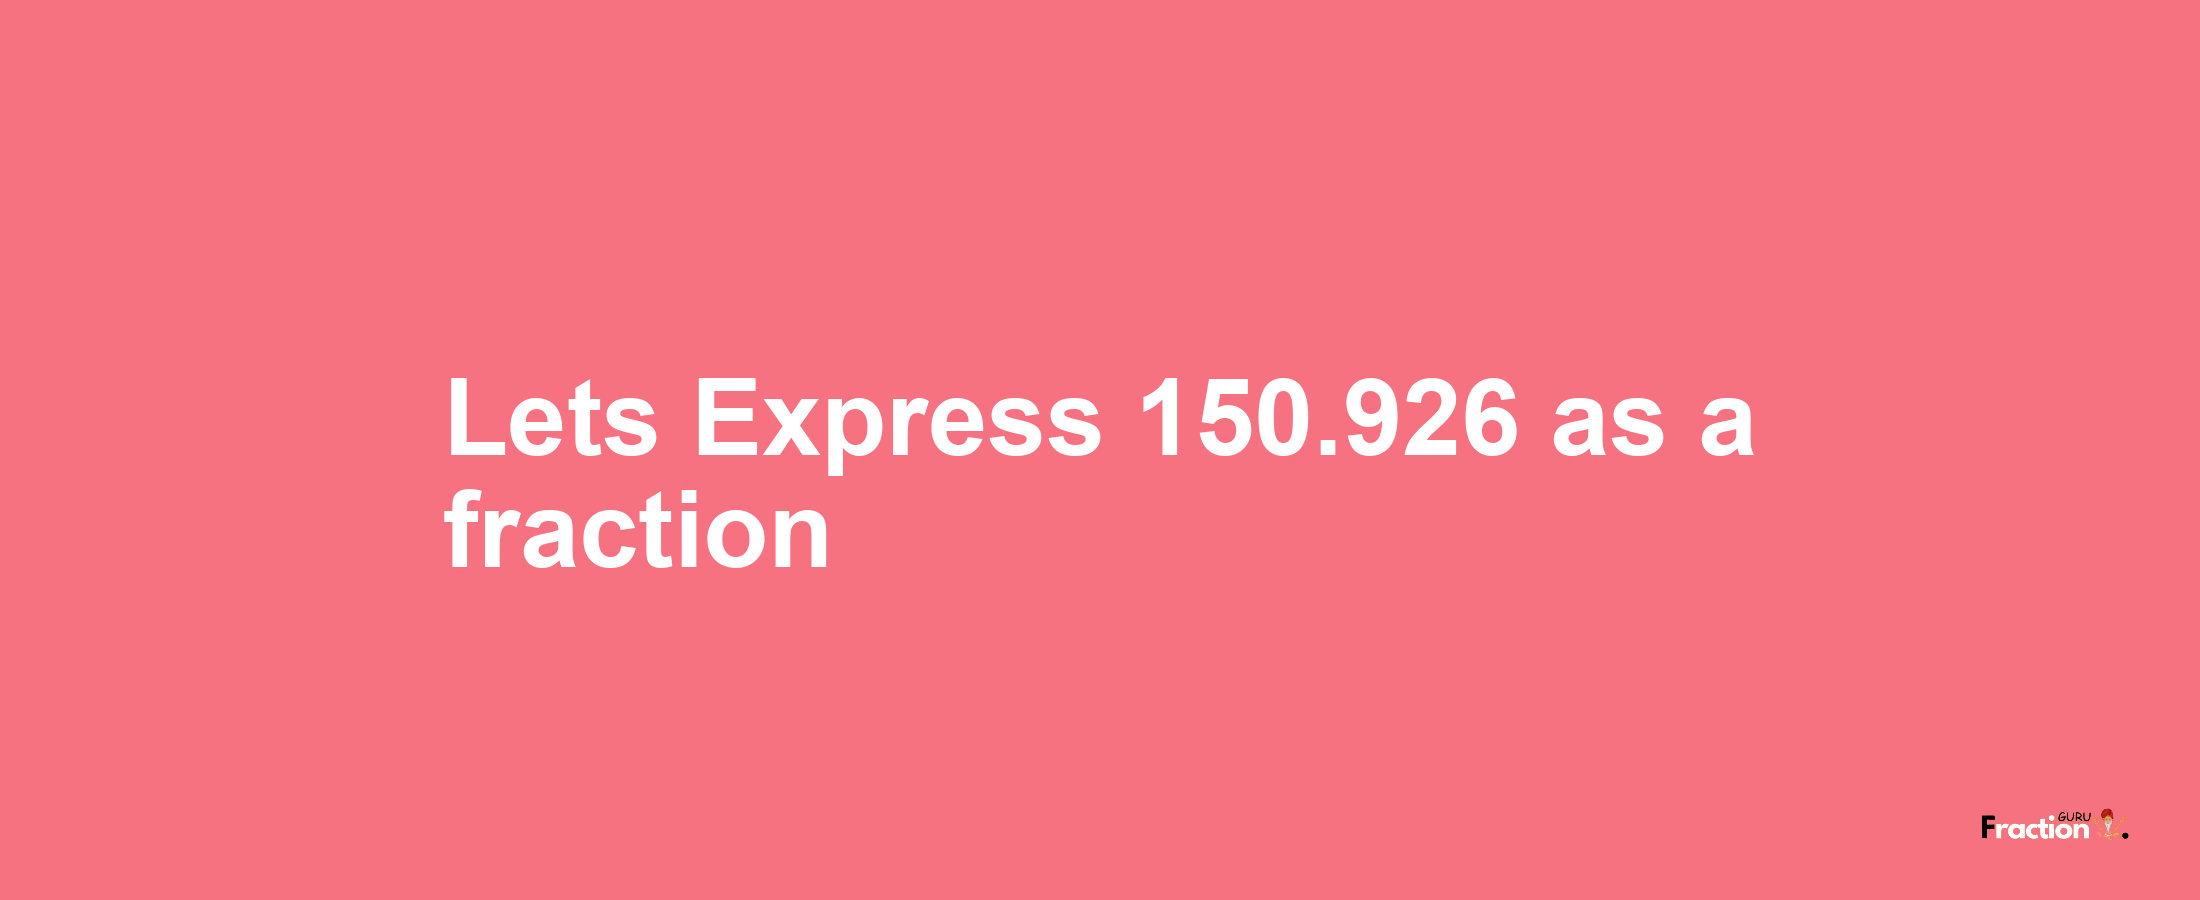 Lets Express 150.926 as afraction